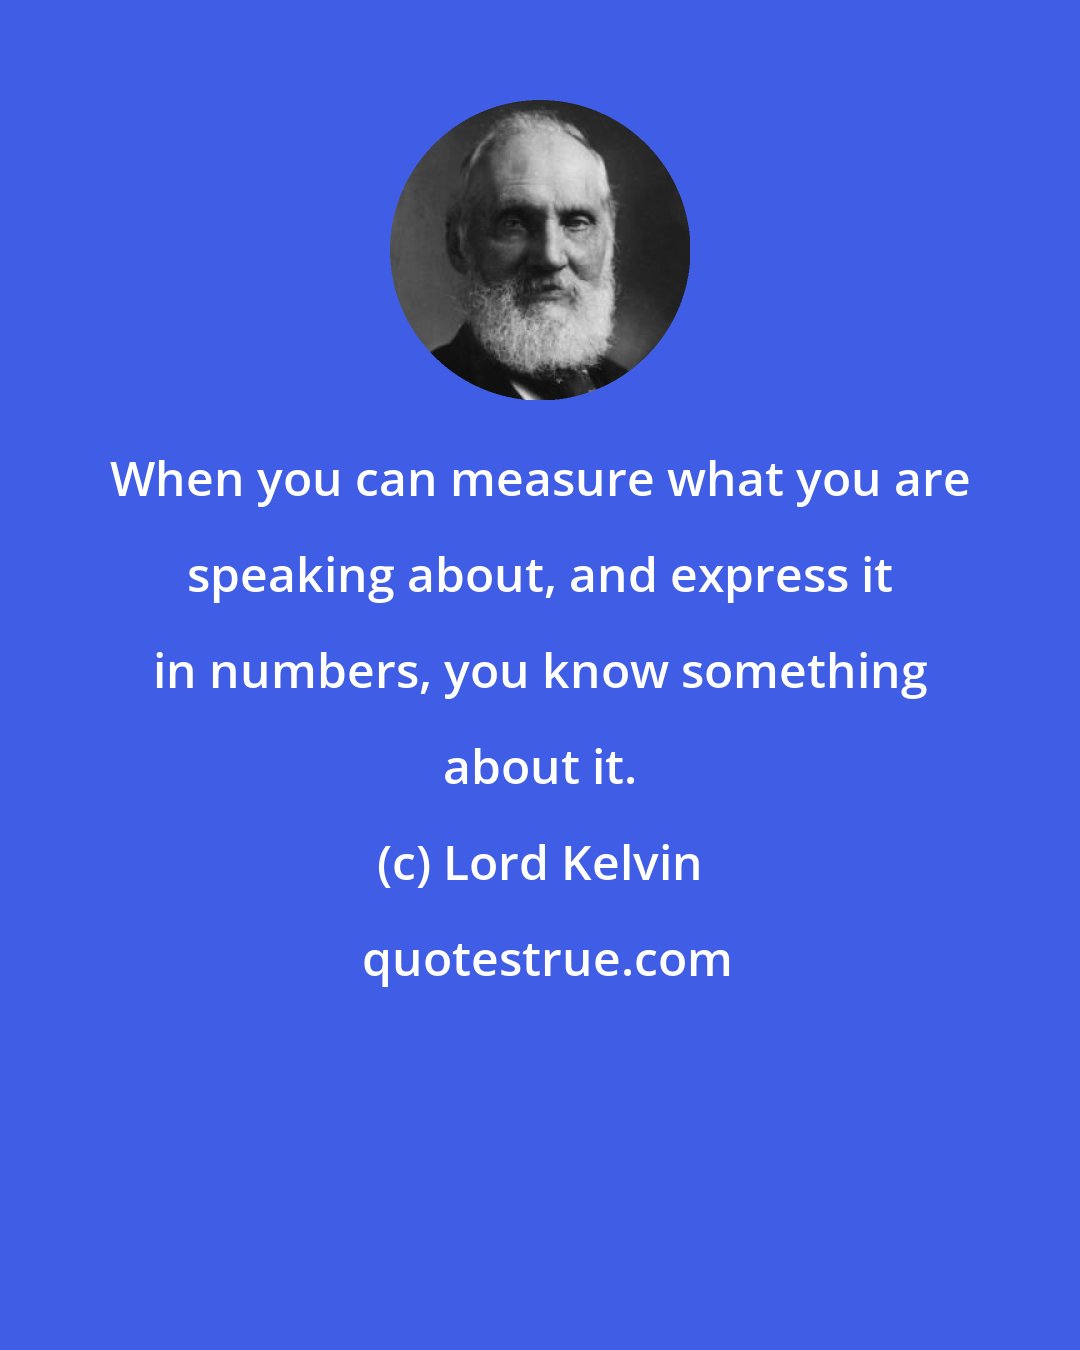 Lord Kelvin: When you can measure what you are speaking about, and express it in numbers, you know something about it.